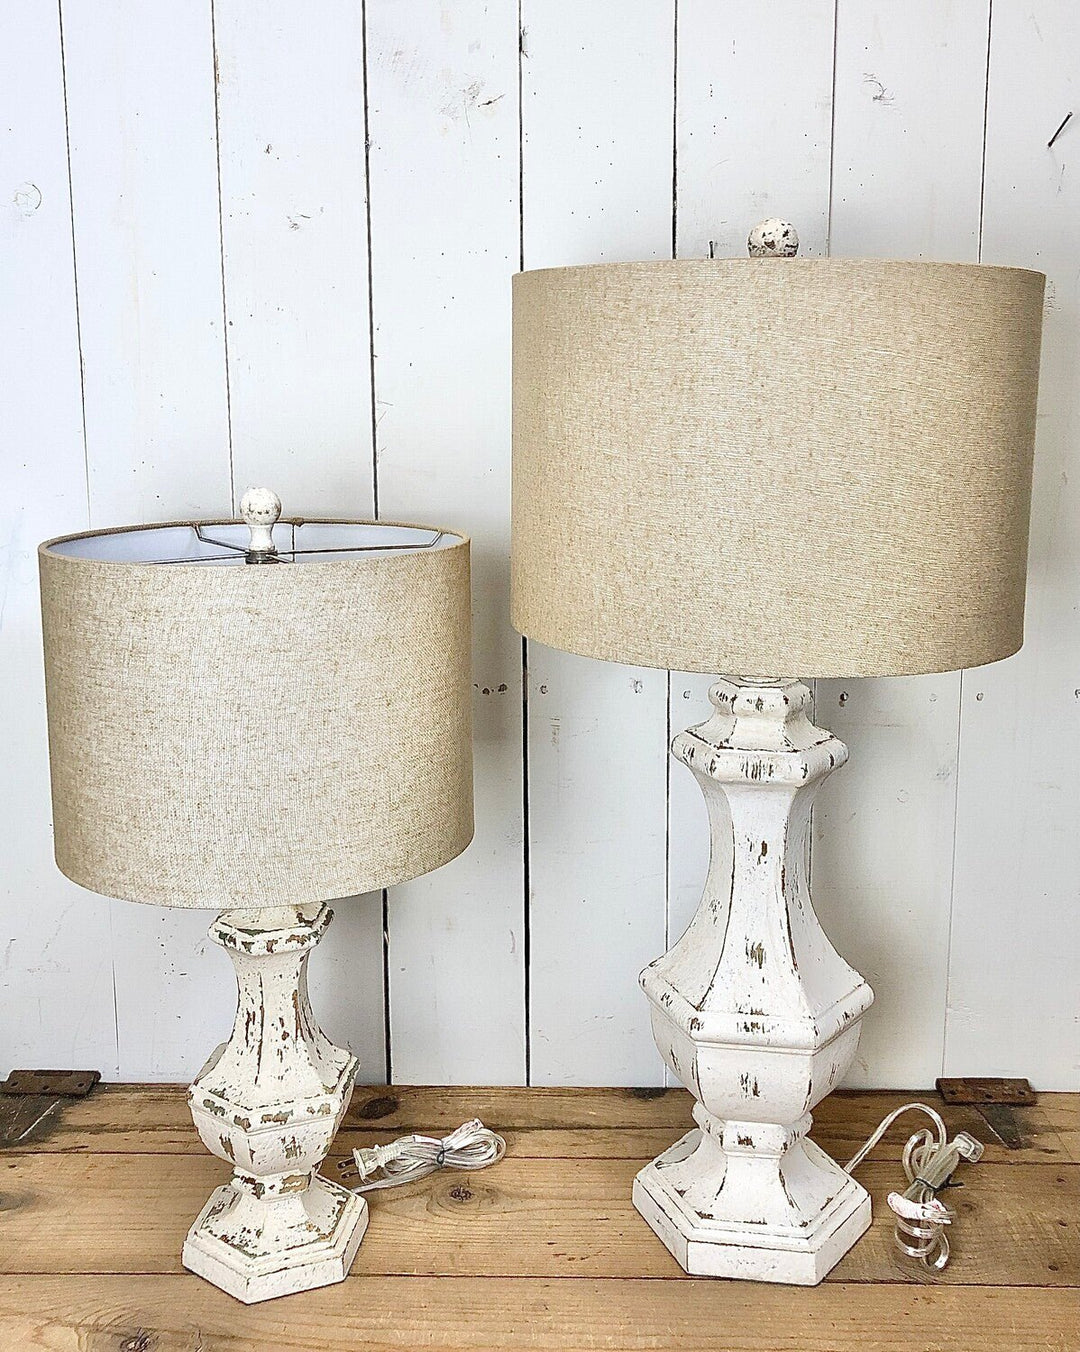 White Distressed Lamp with Tan Shade